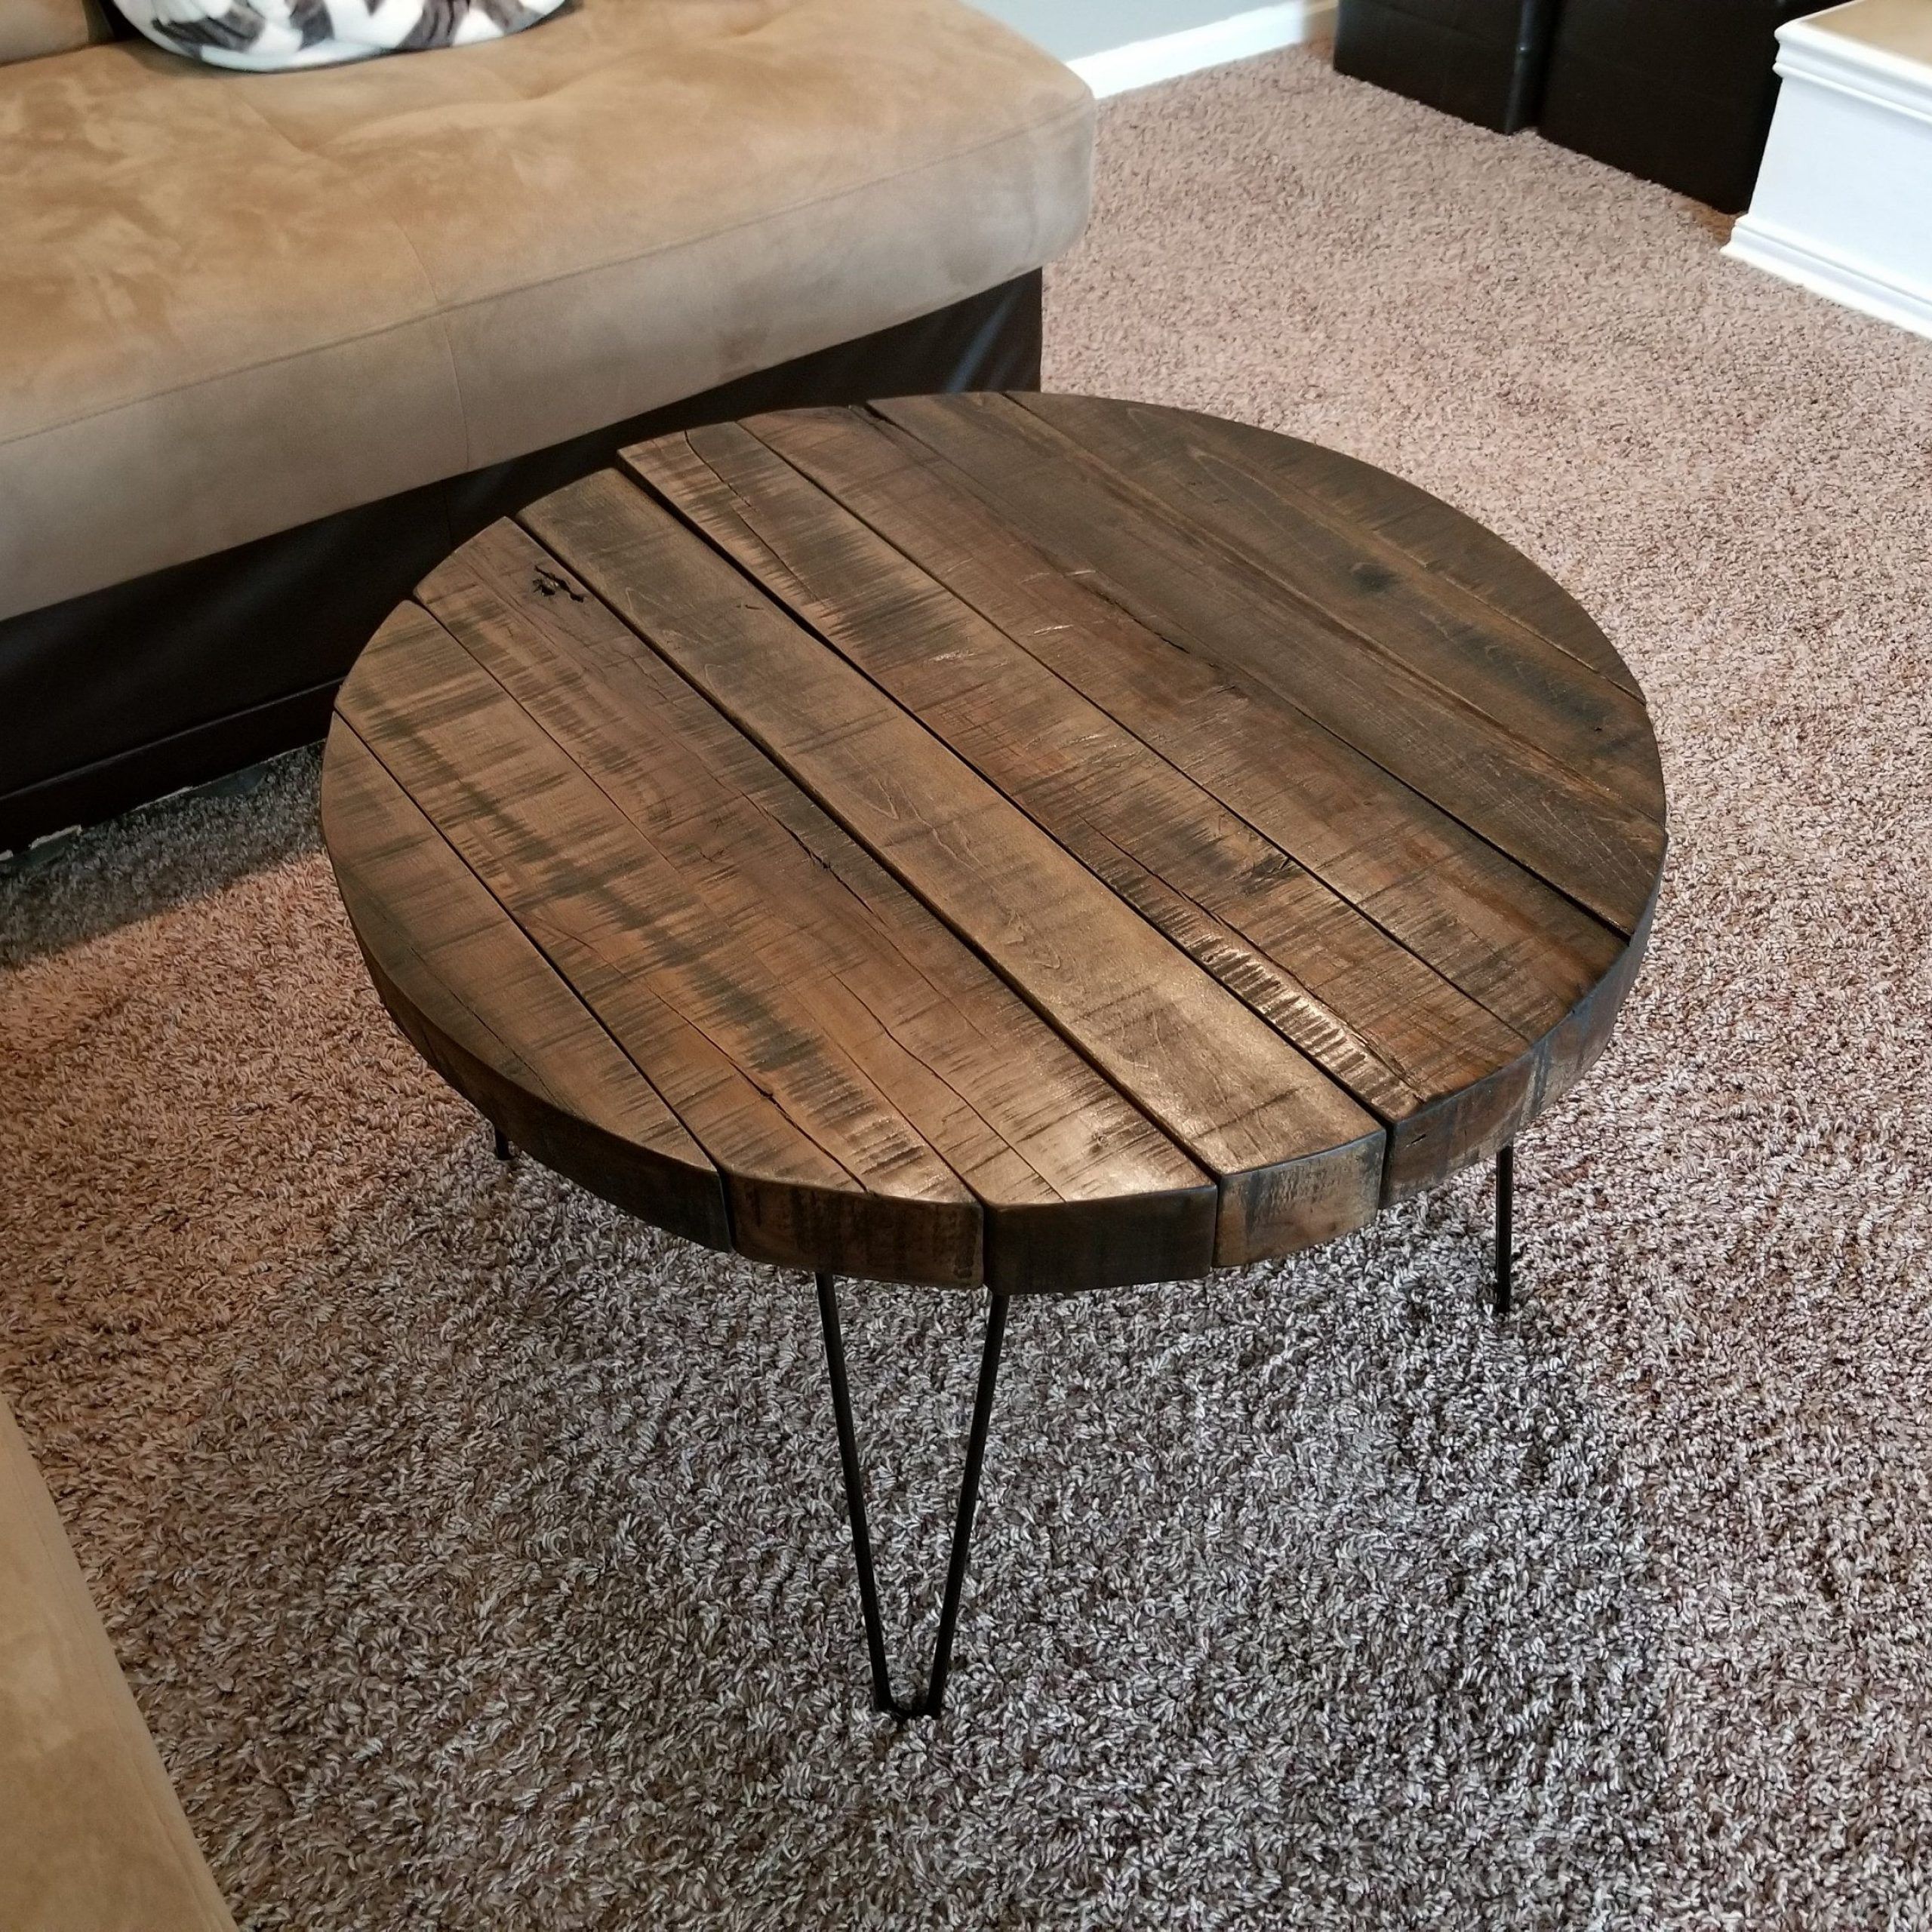 Reclaimed Wood Round Coffee Table With Hairpin Legs Inside Most Current Round Hairpin Leg Dining Tables (View 12 of 15)